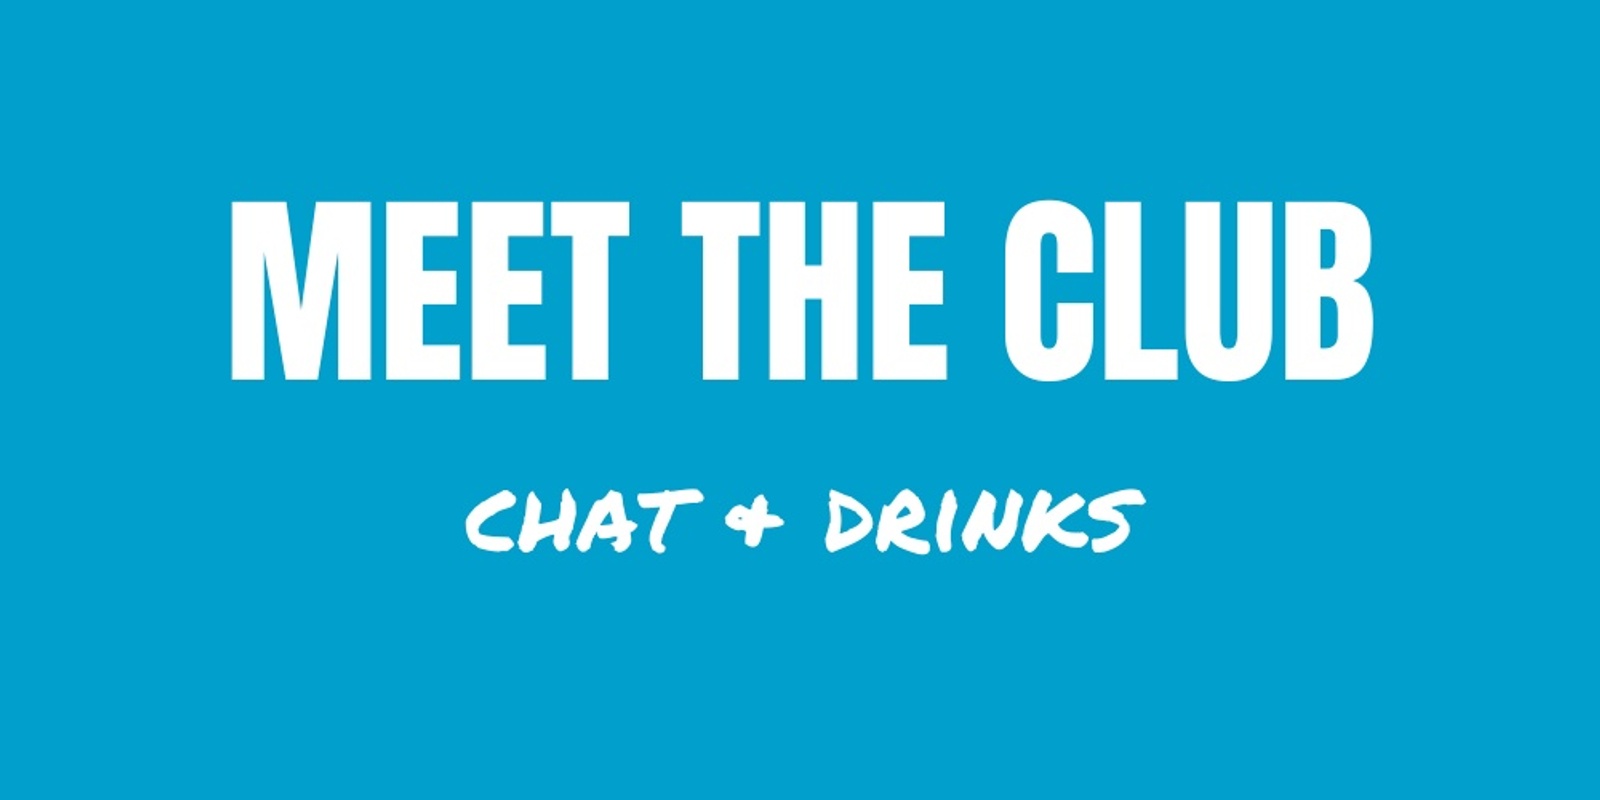 Banner image for BRC "Meet the Club" chats & drinks